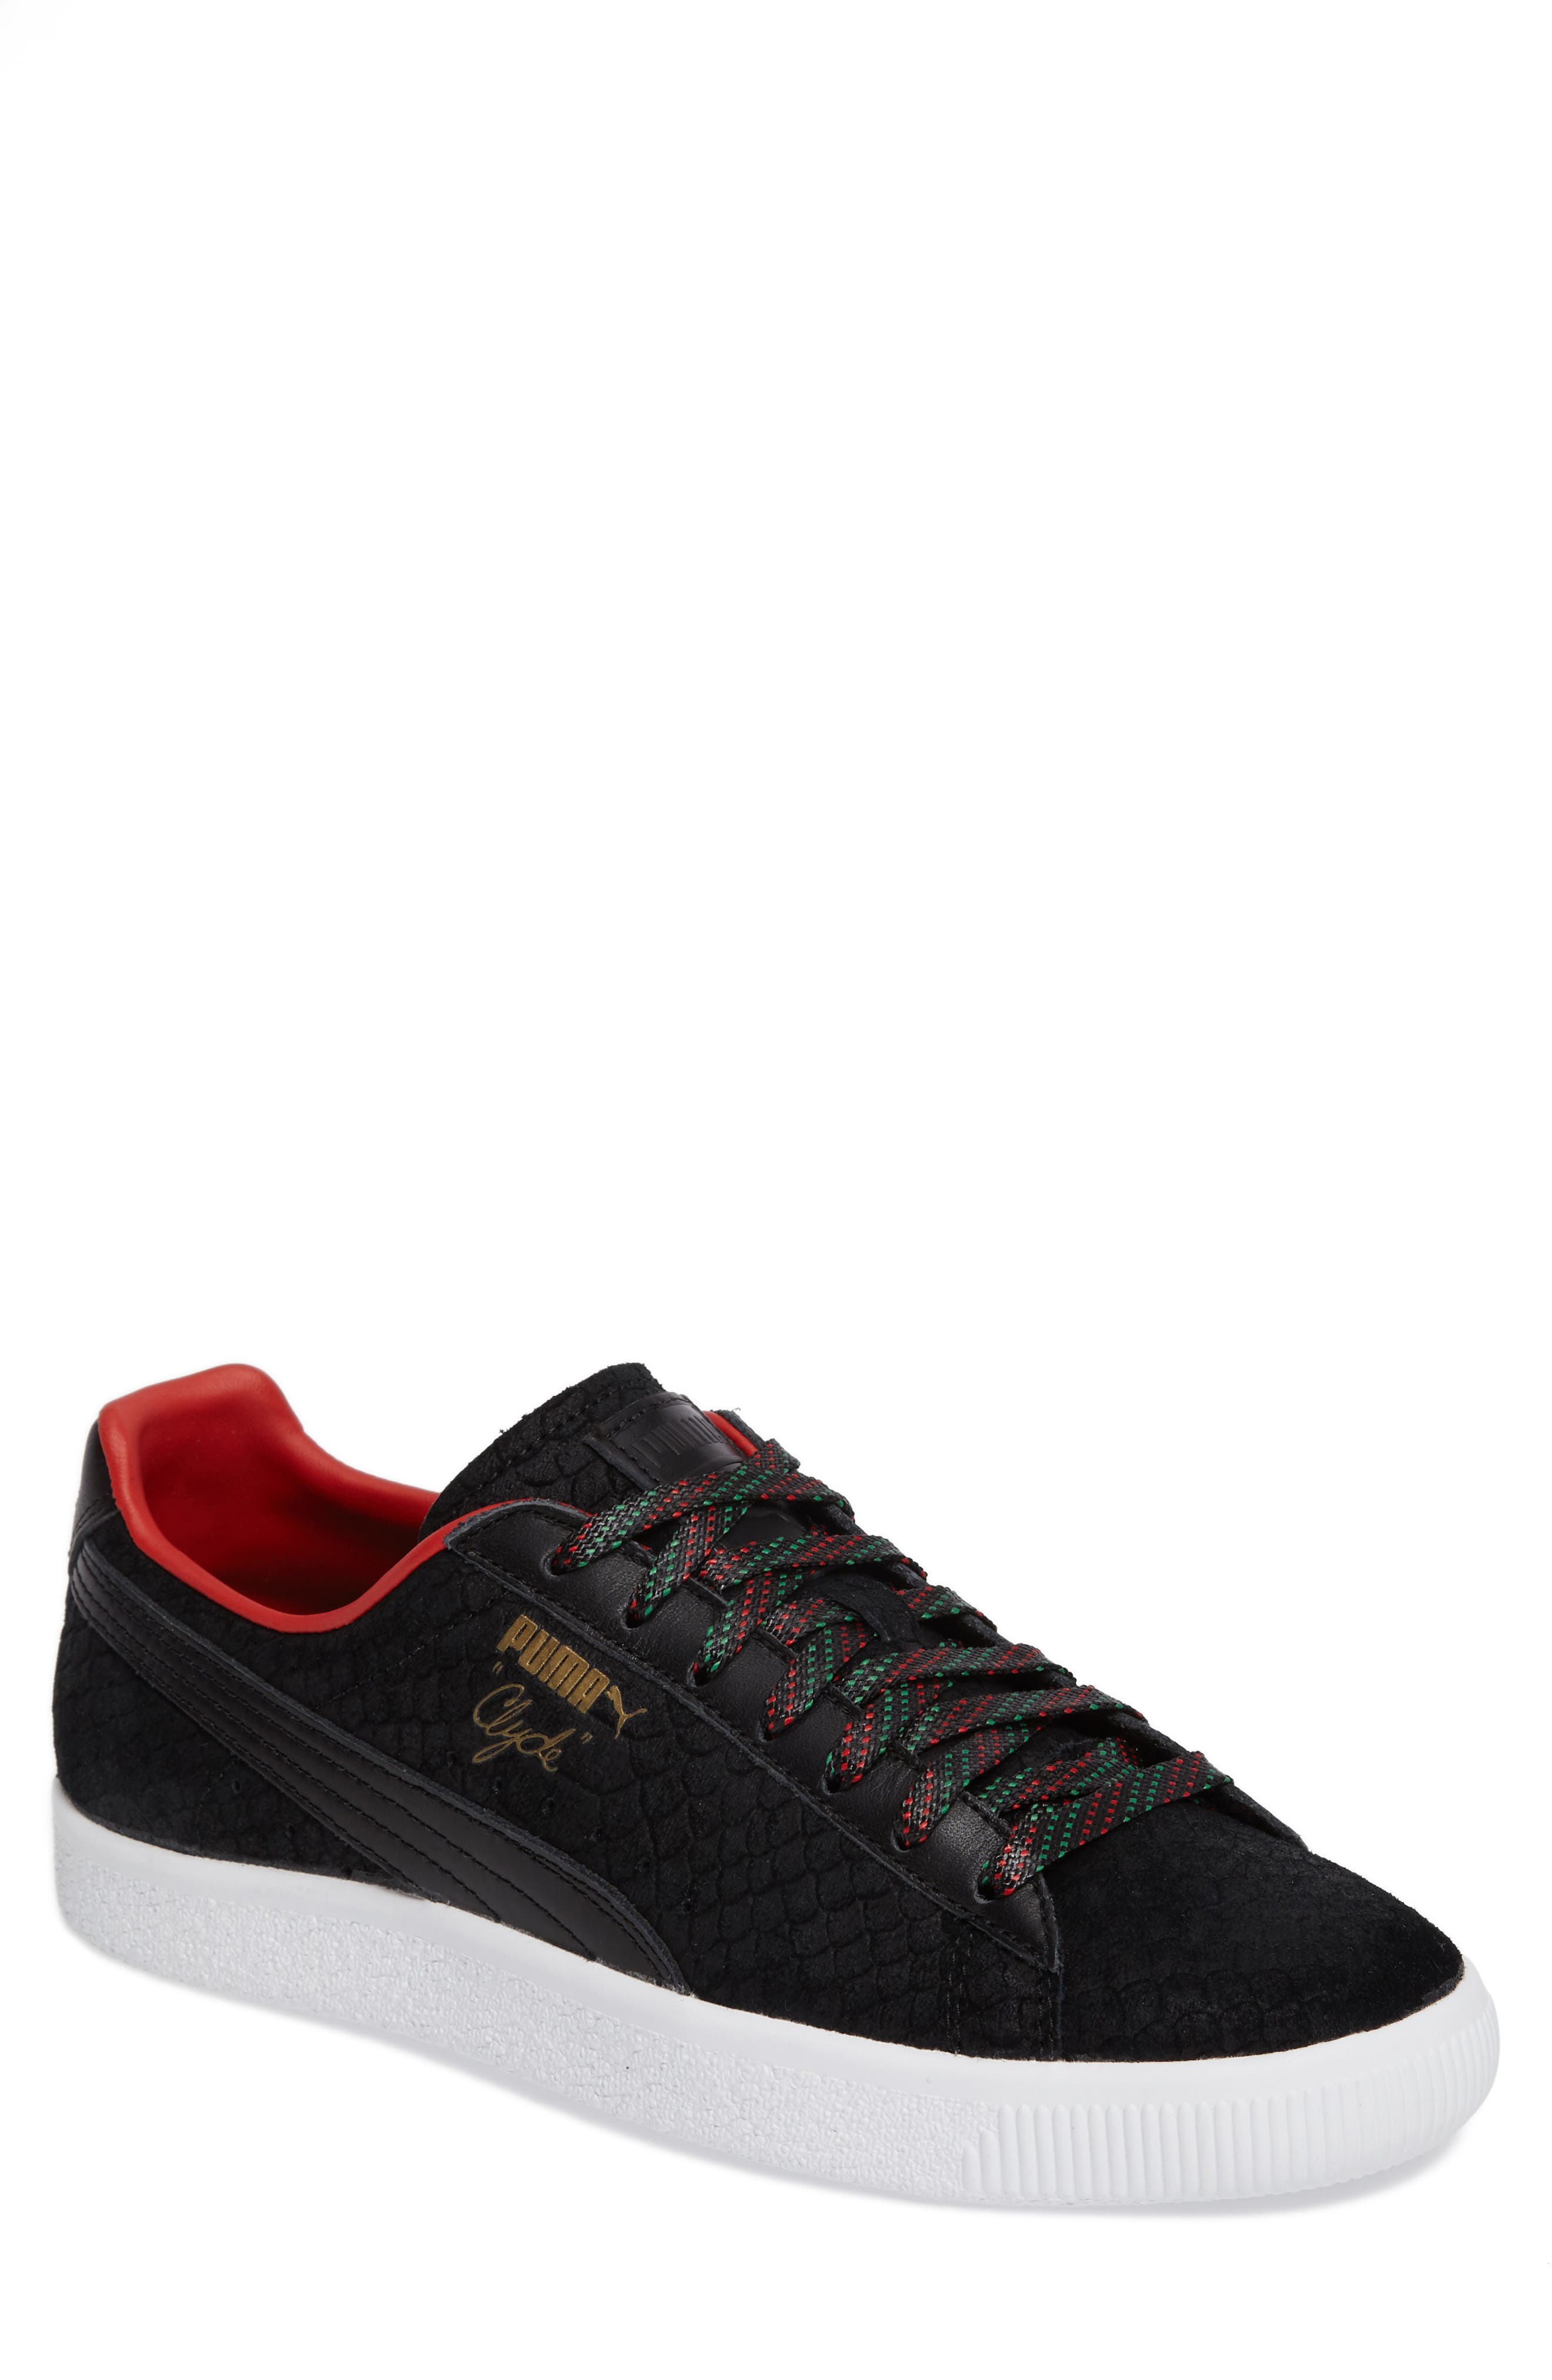 puma shoes for men red